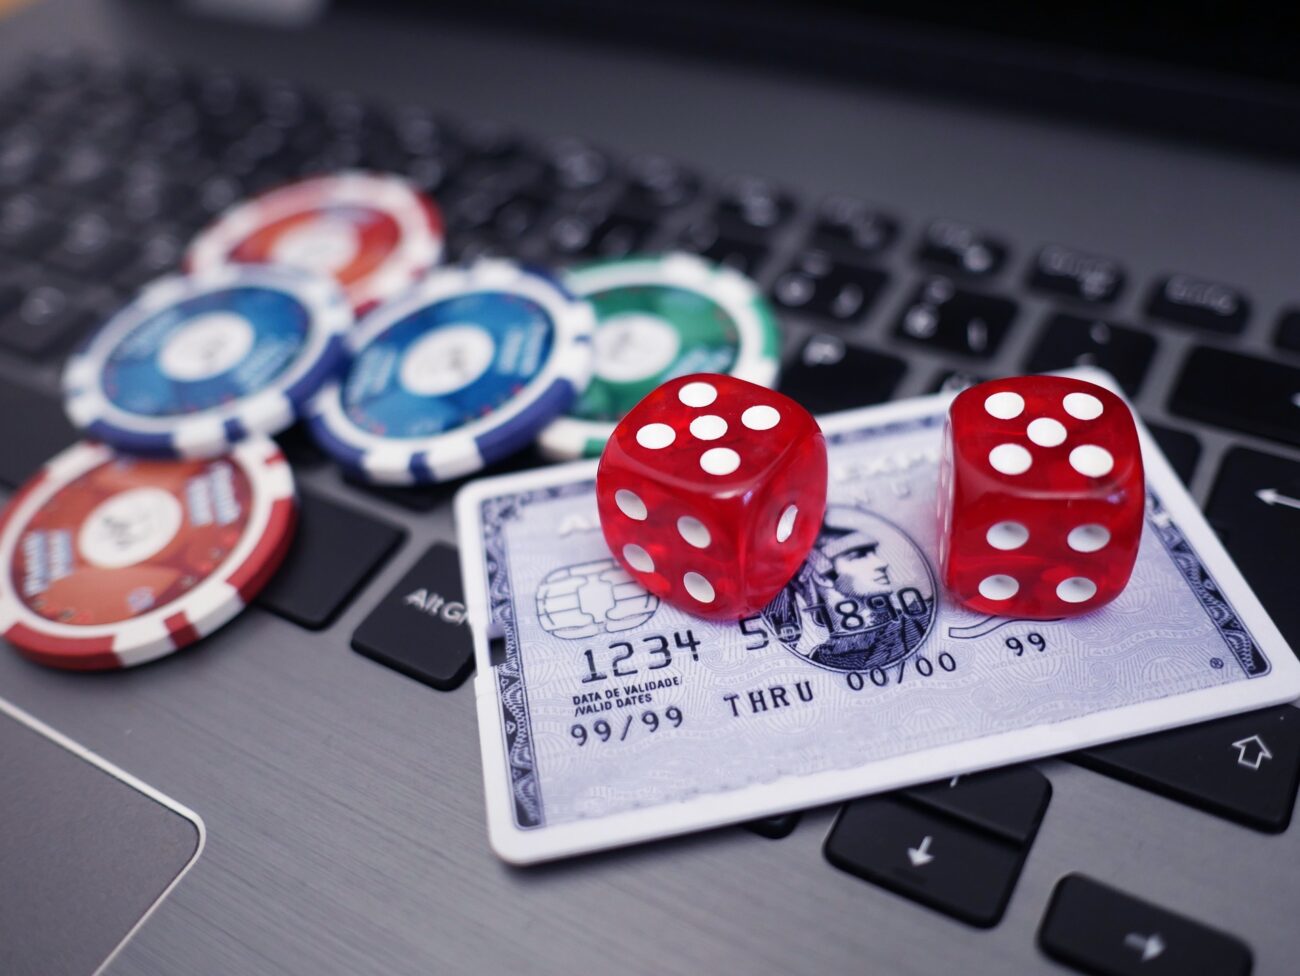 To make it easier for you to start gambling online, we have put together a vetted list of the top casino sites for players from Singapore.